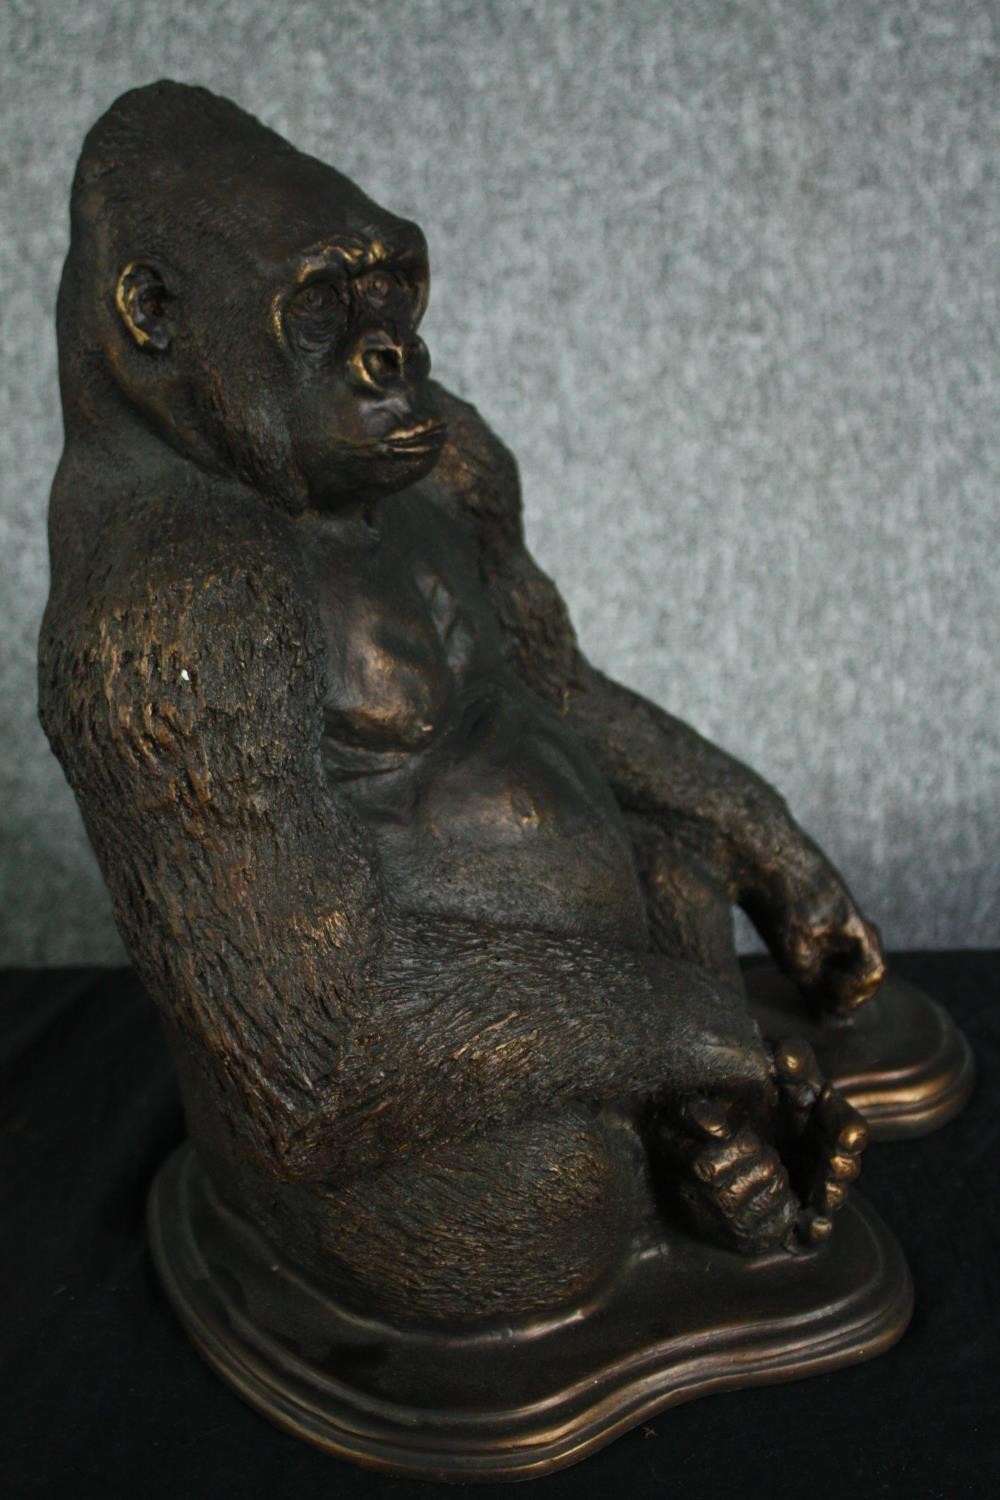 A large moulded figure. A gorilla finished in a distressed bronze type patina. H.40cm. - Image 3 of 4